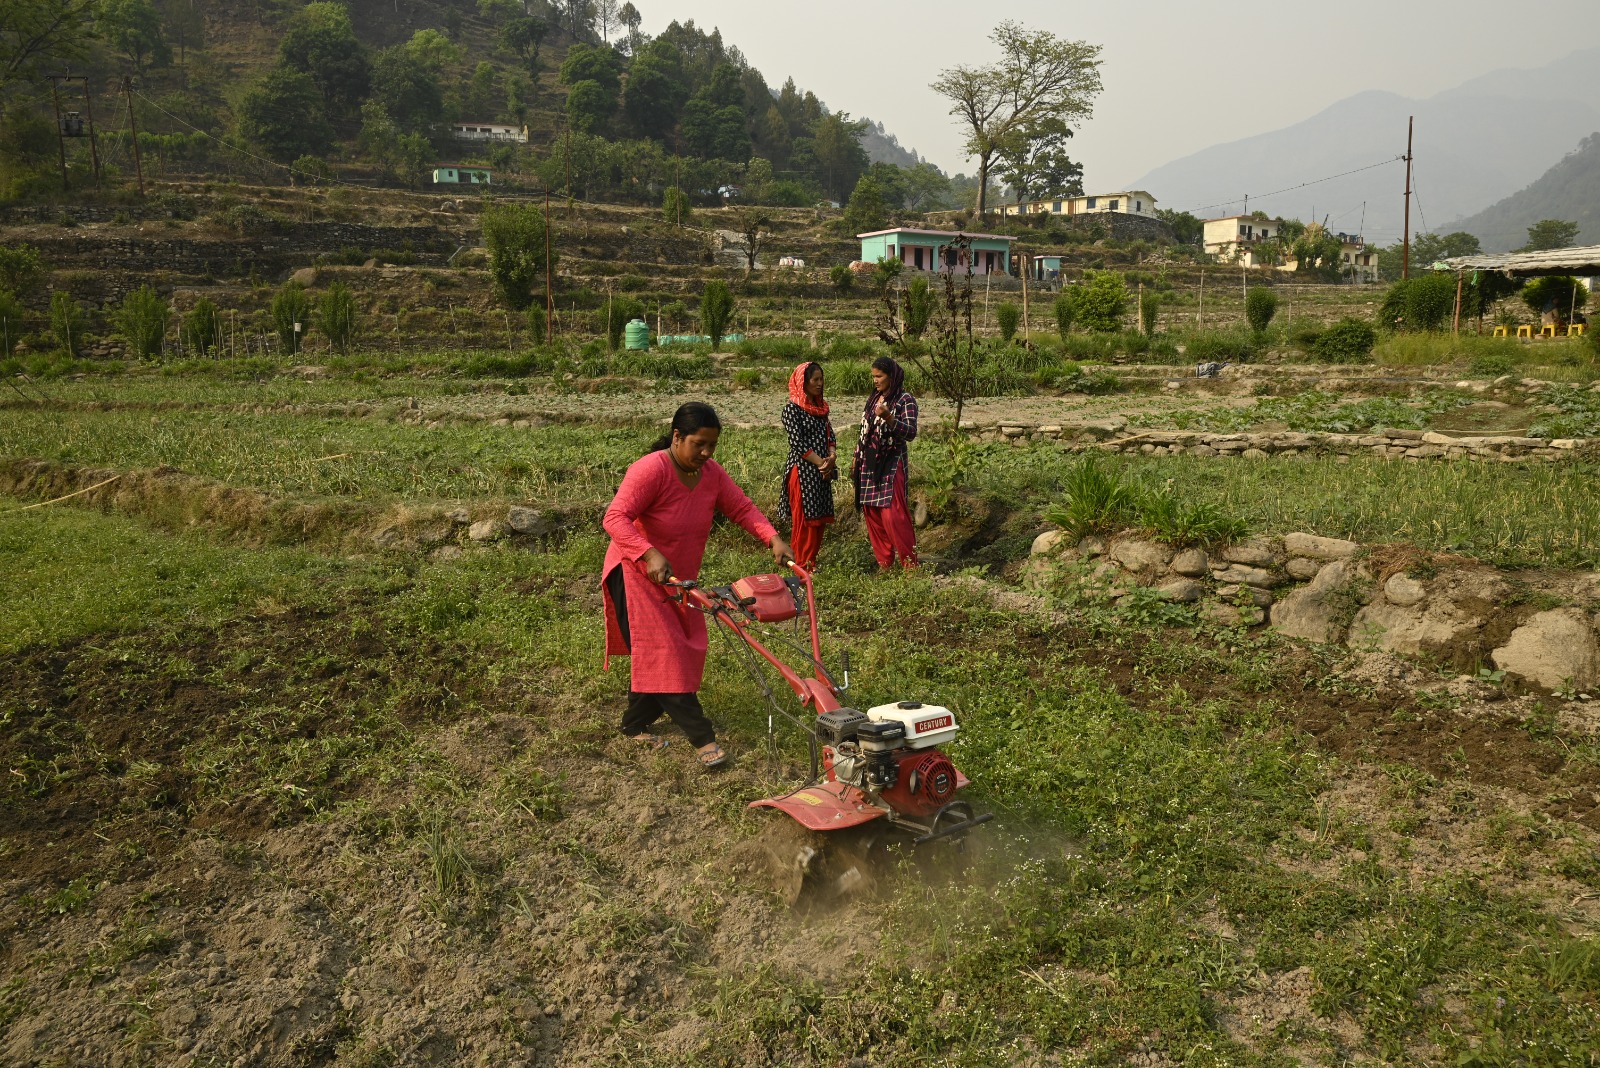 Women of Uttarakhand take part in agricultural activities using tools and techniques.